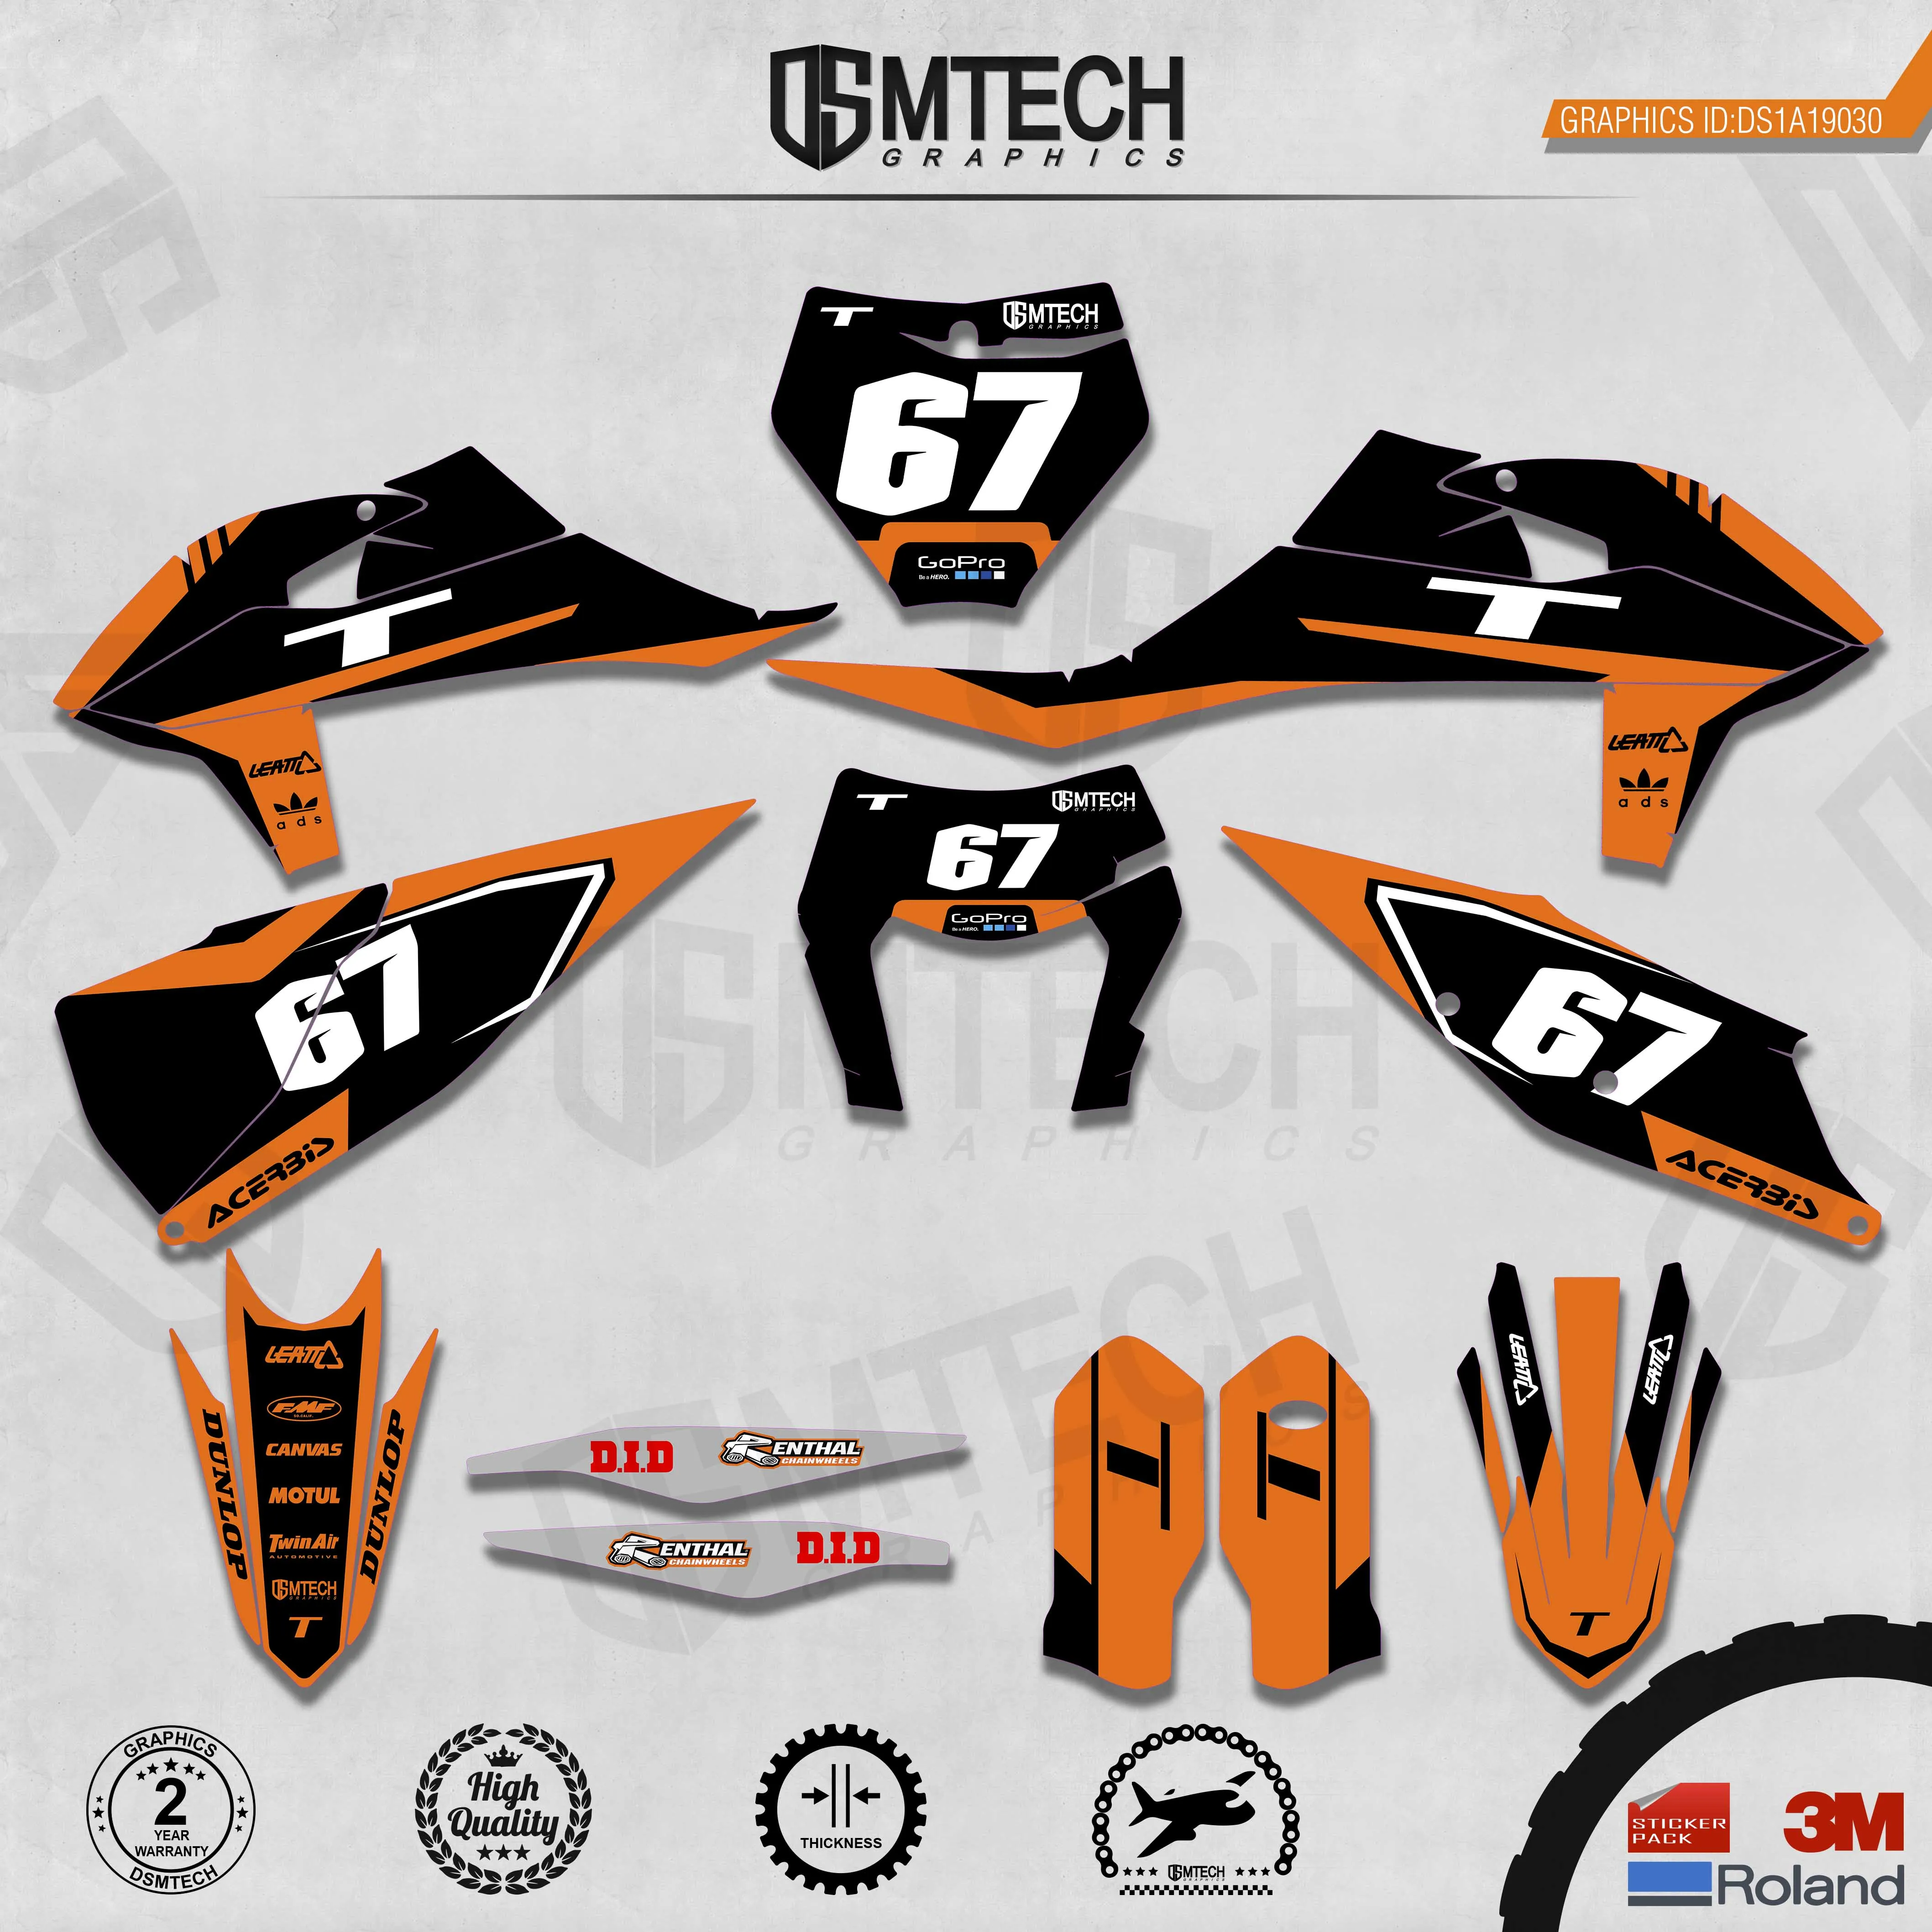 DSMTECH Customized Team Graphics Backgrounds Decals 3M Custom Stickers For 2019-2020 SXF 2020-2021EXC 030